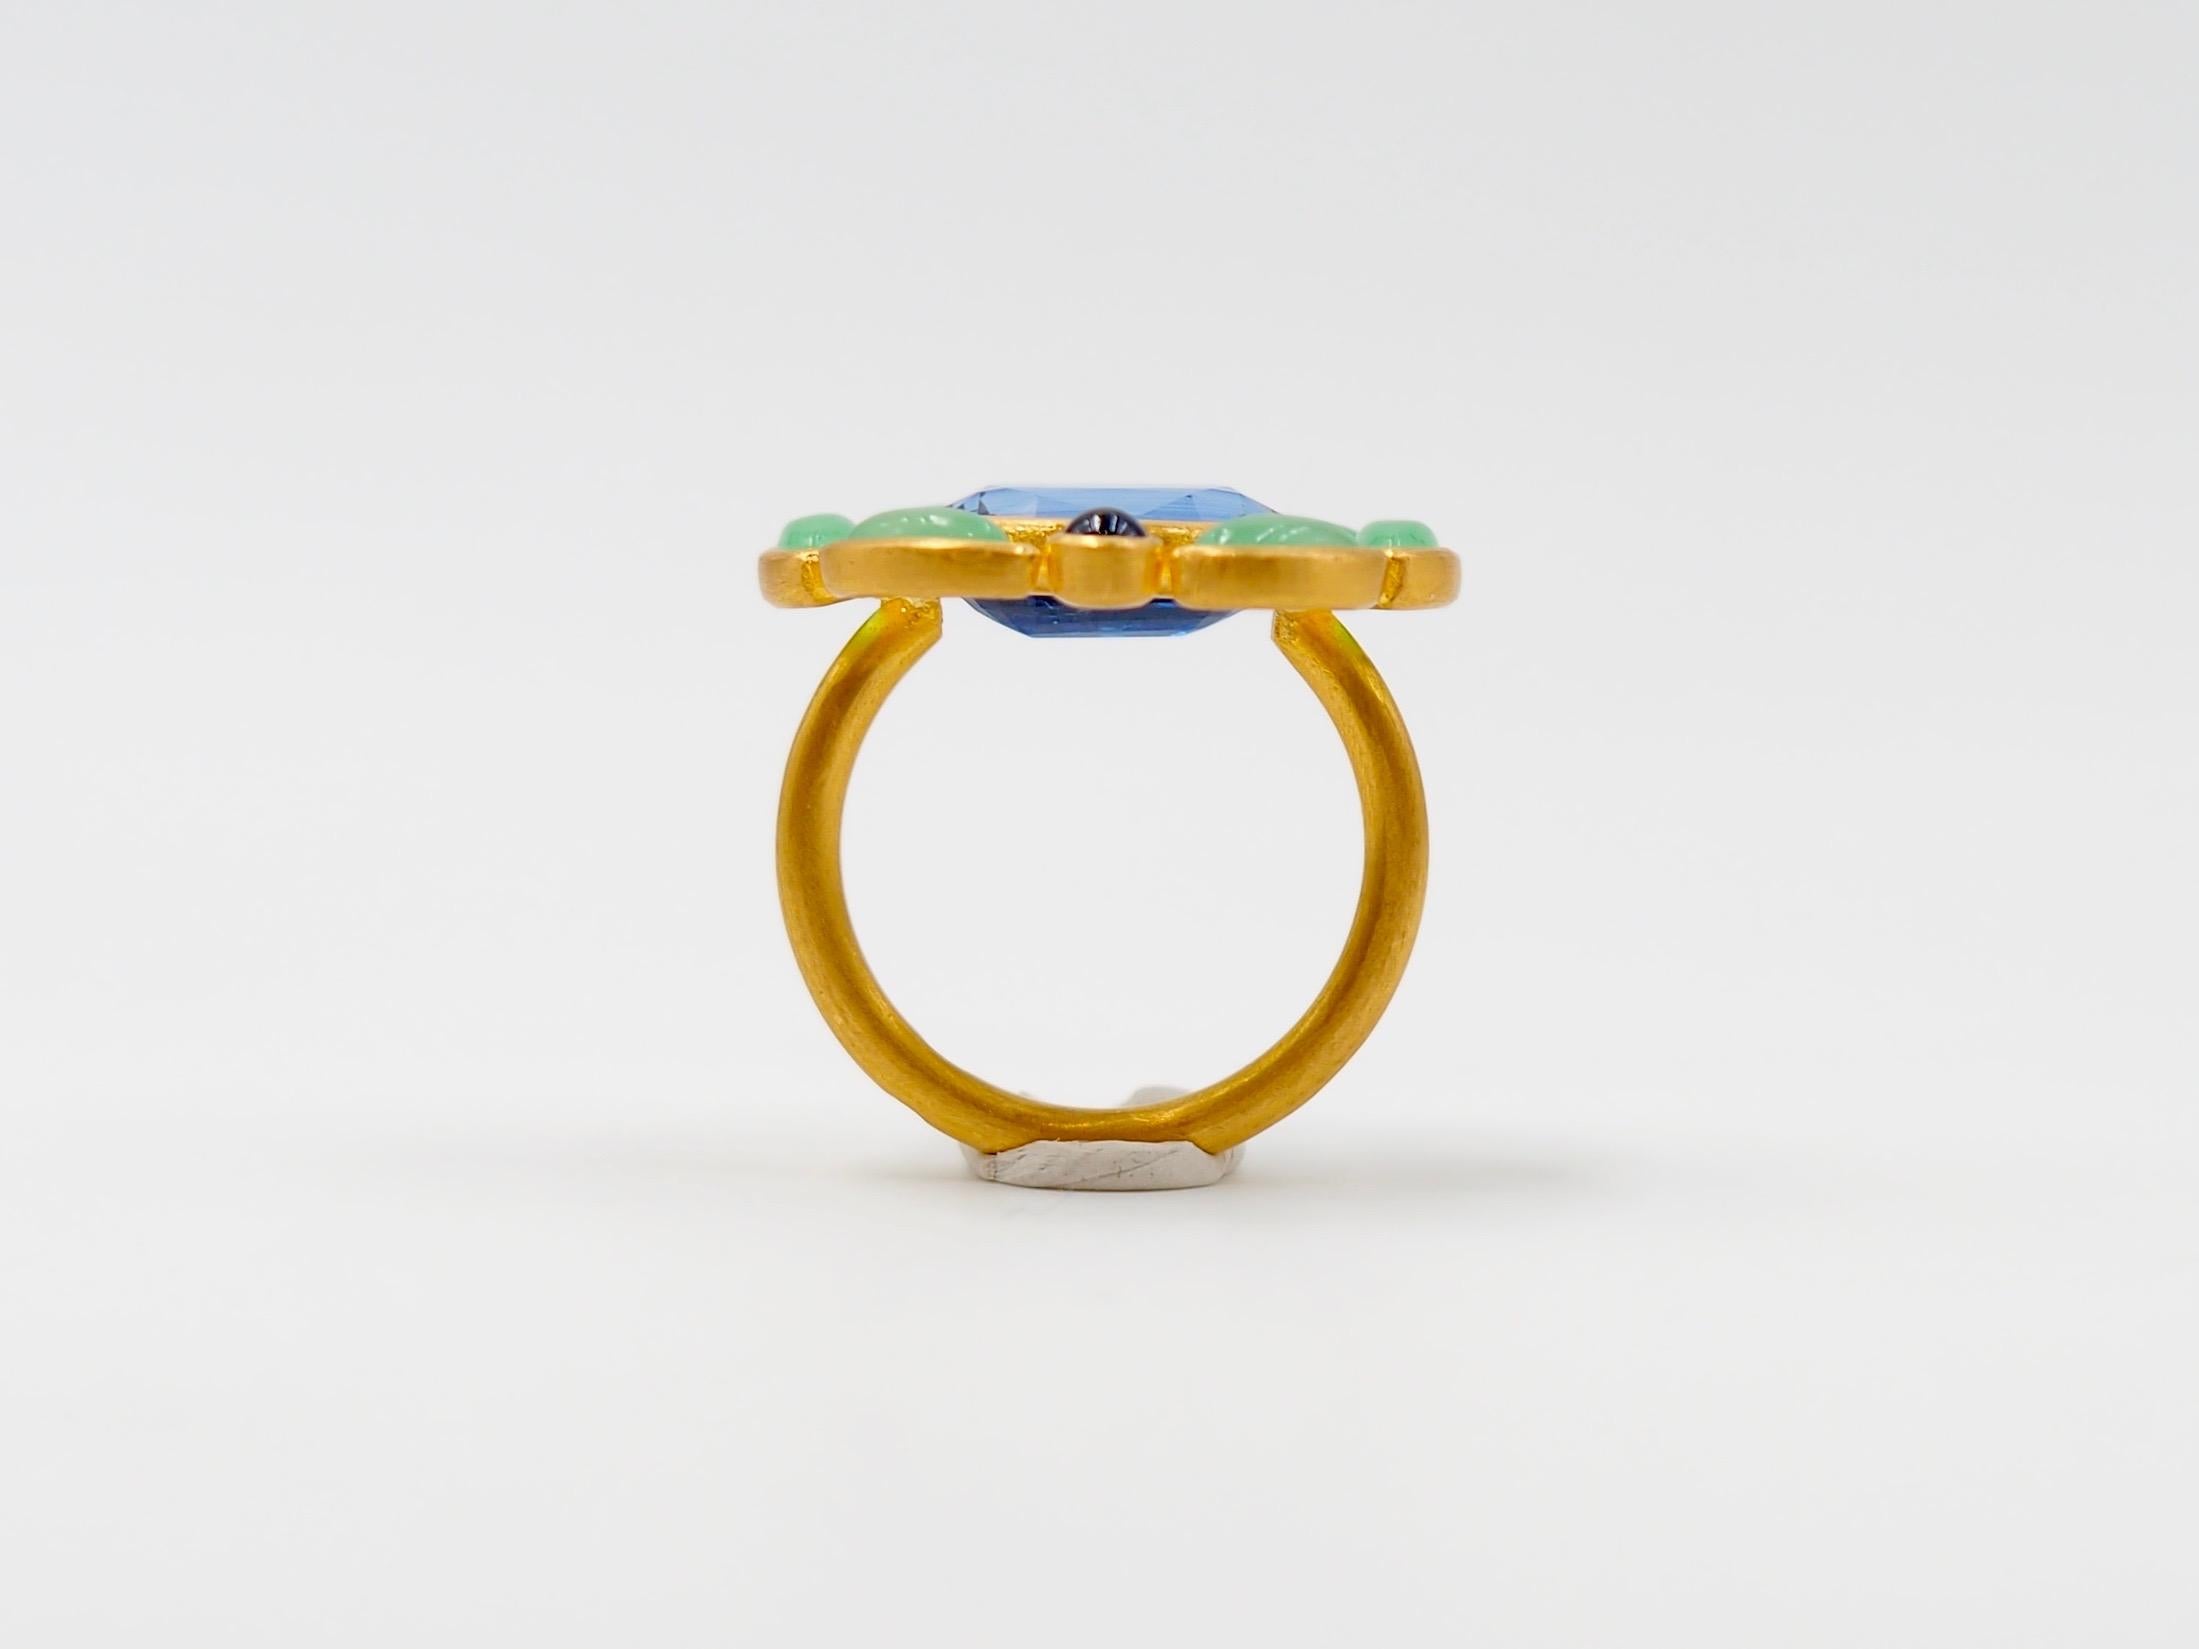 Contemporary Scrives Kyanite Chrysoprase Sapphire Cabochon 22 Kt Gold Cocktail Handmade Ring